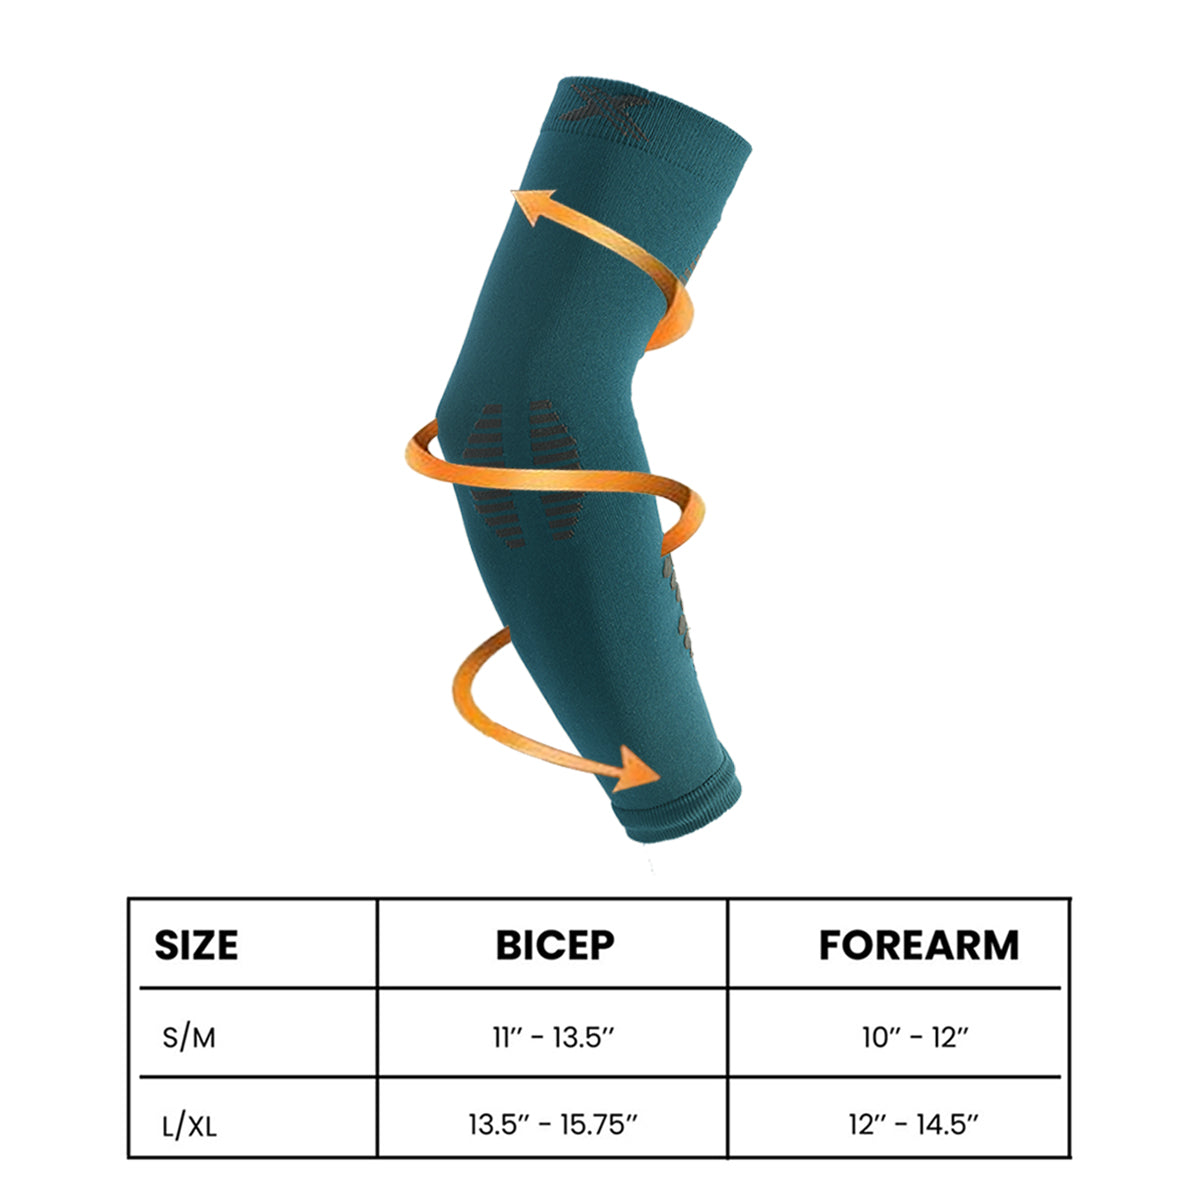 Targeted Compression Elbow Arm Sleeves